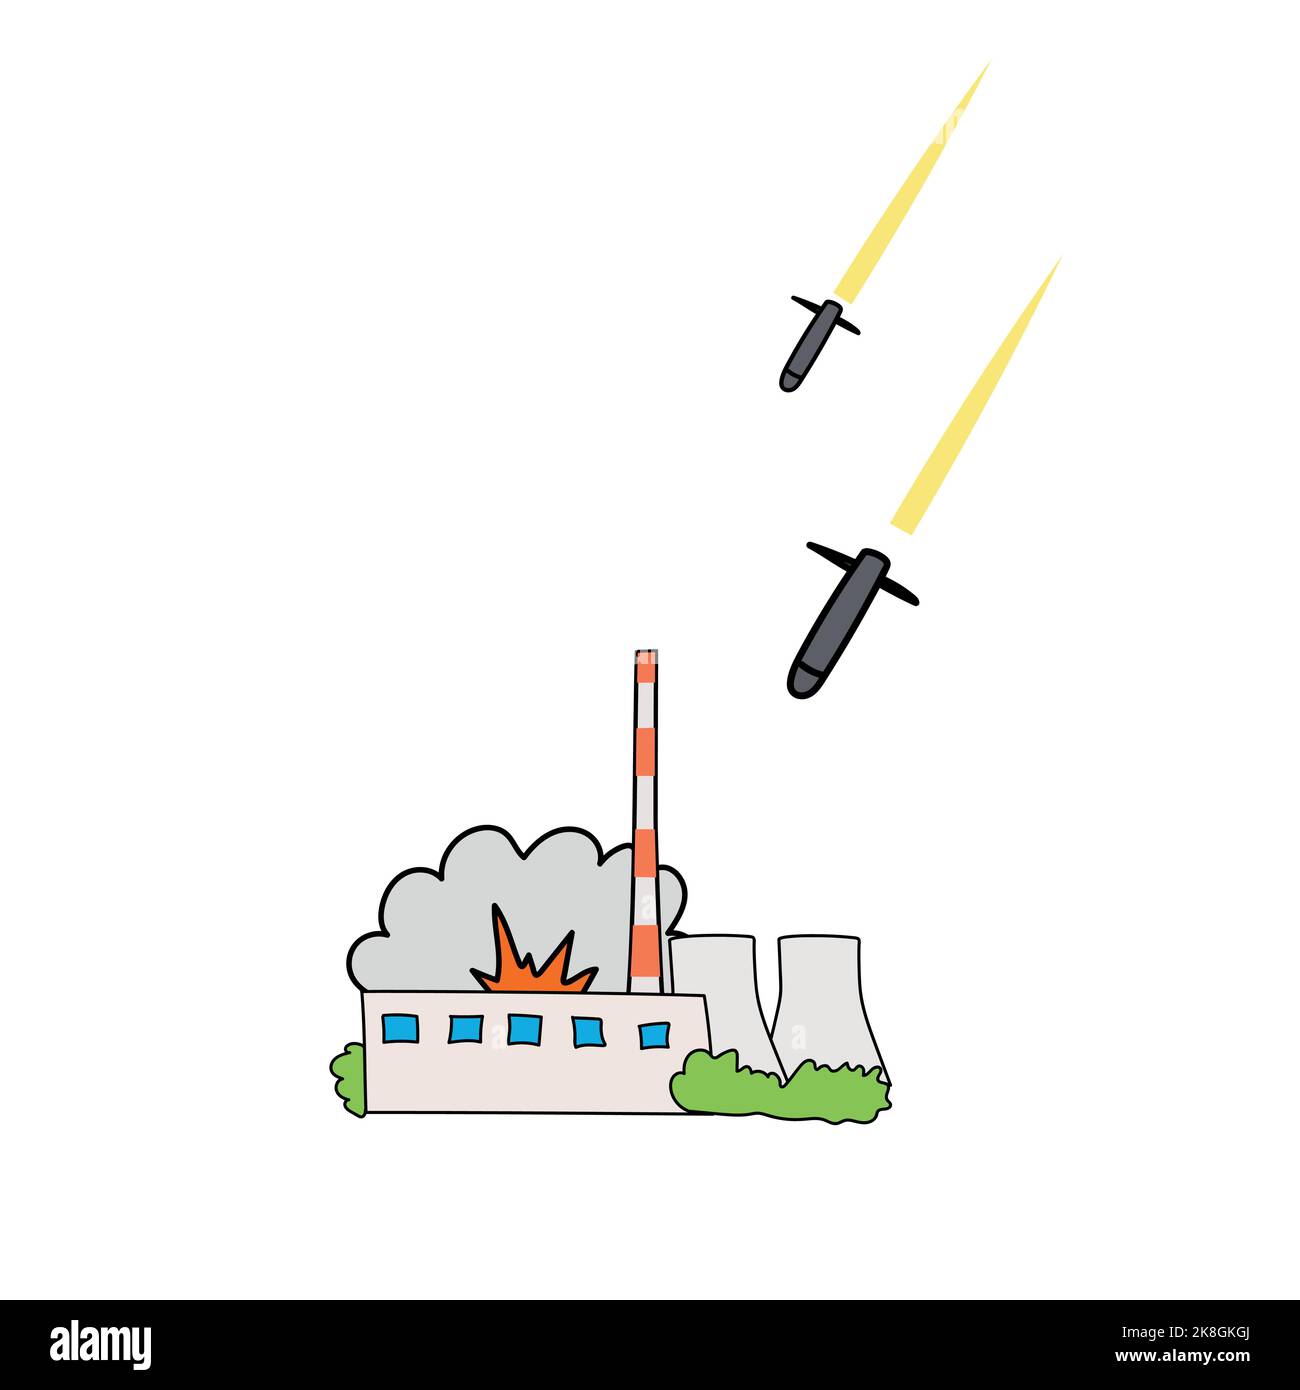 the rockets fly into the energy infrastructure Stock Vector